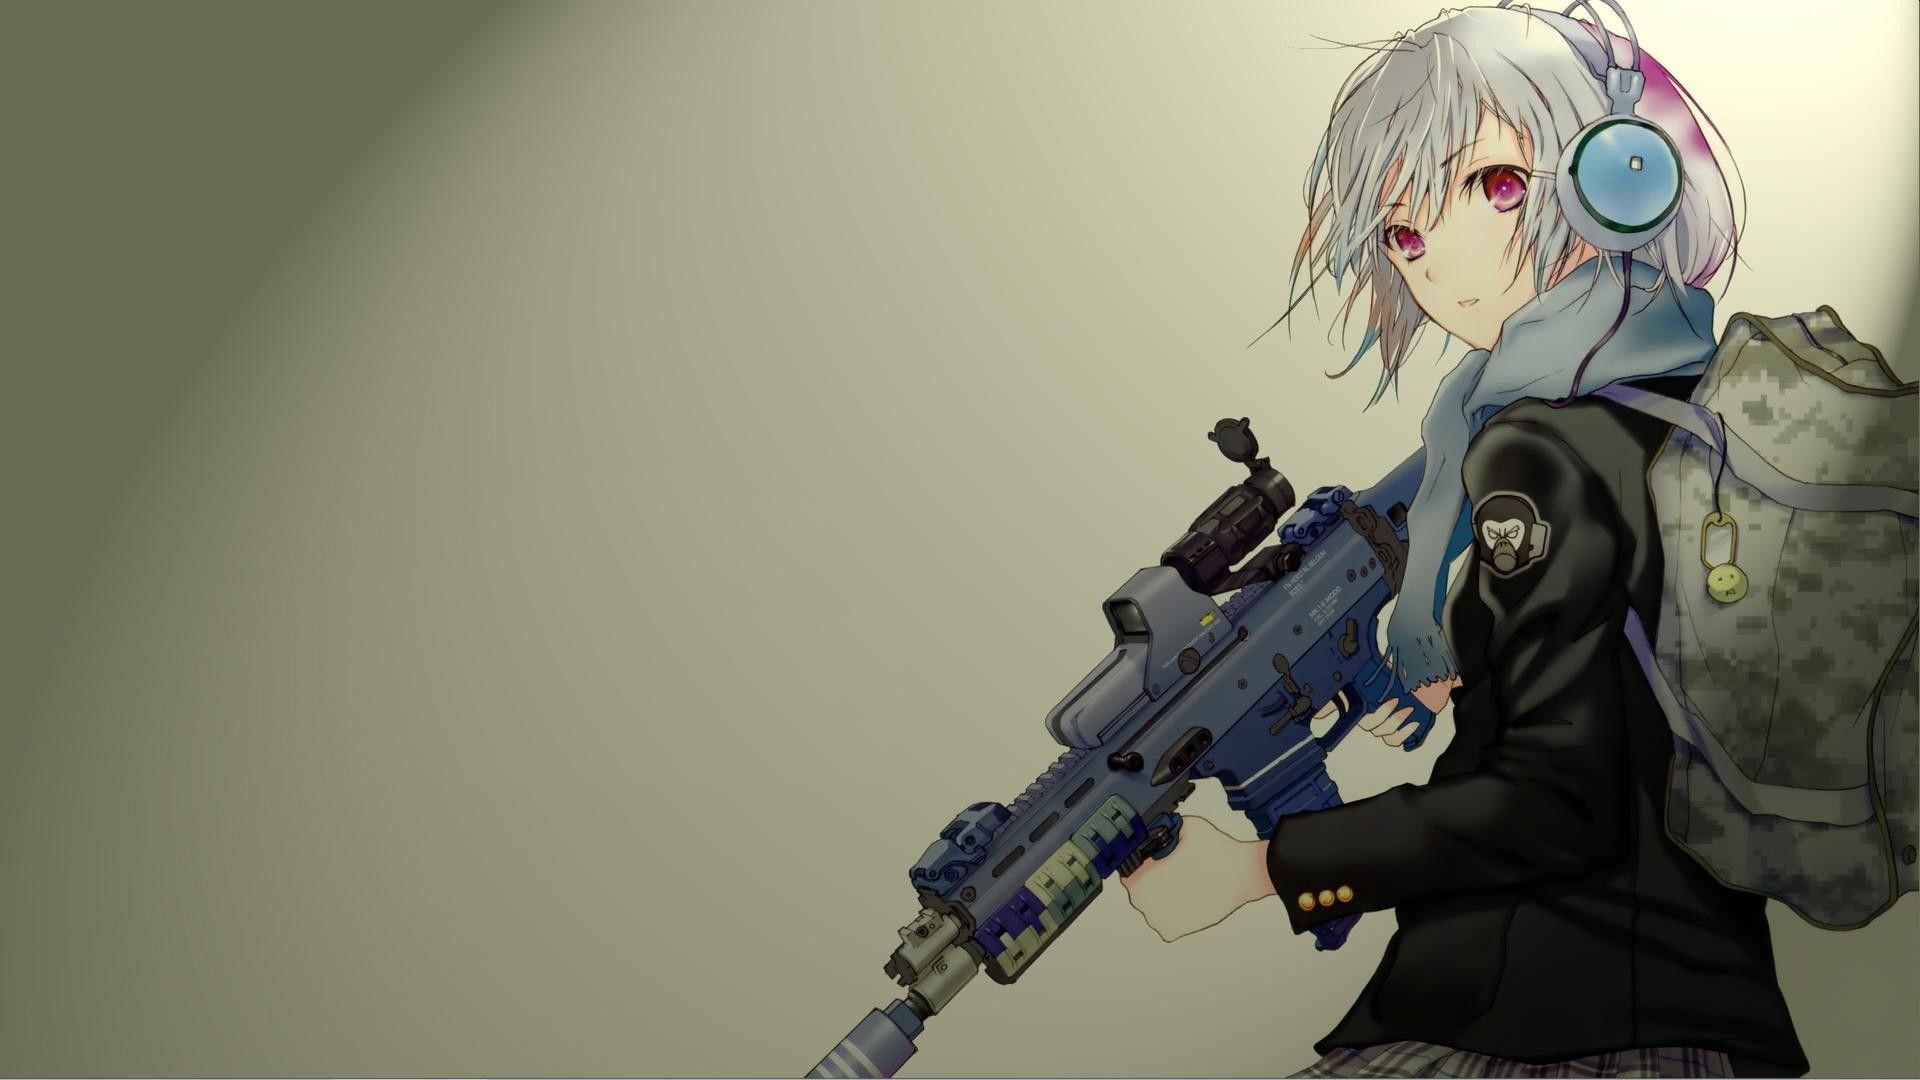 Anime character with brown haired holding rifle Anime Female Firearm Girls with  guns Manga Anime assault Rifle airsoft png  PNGEgg